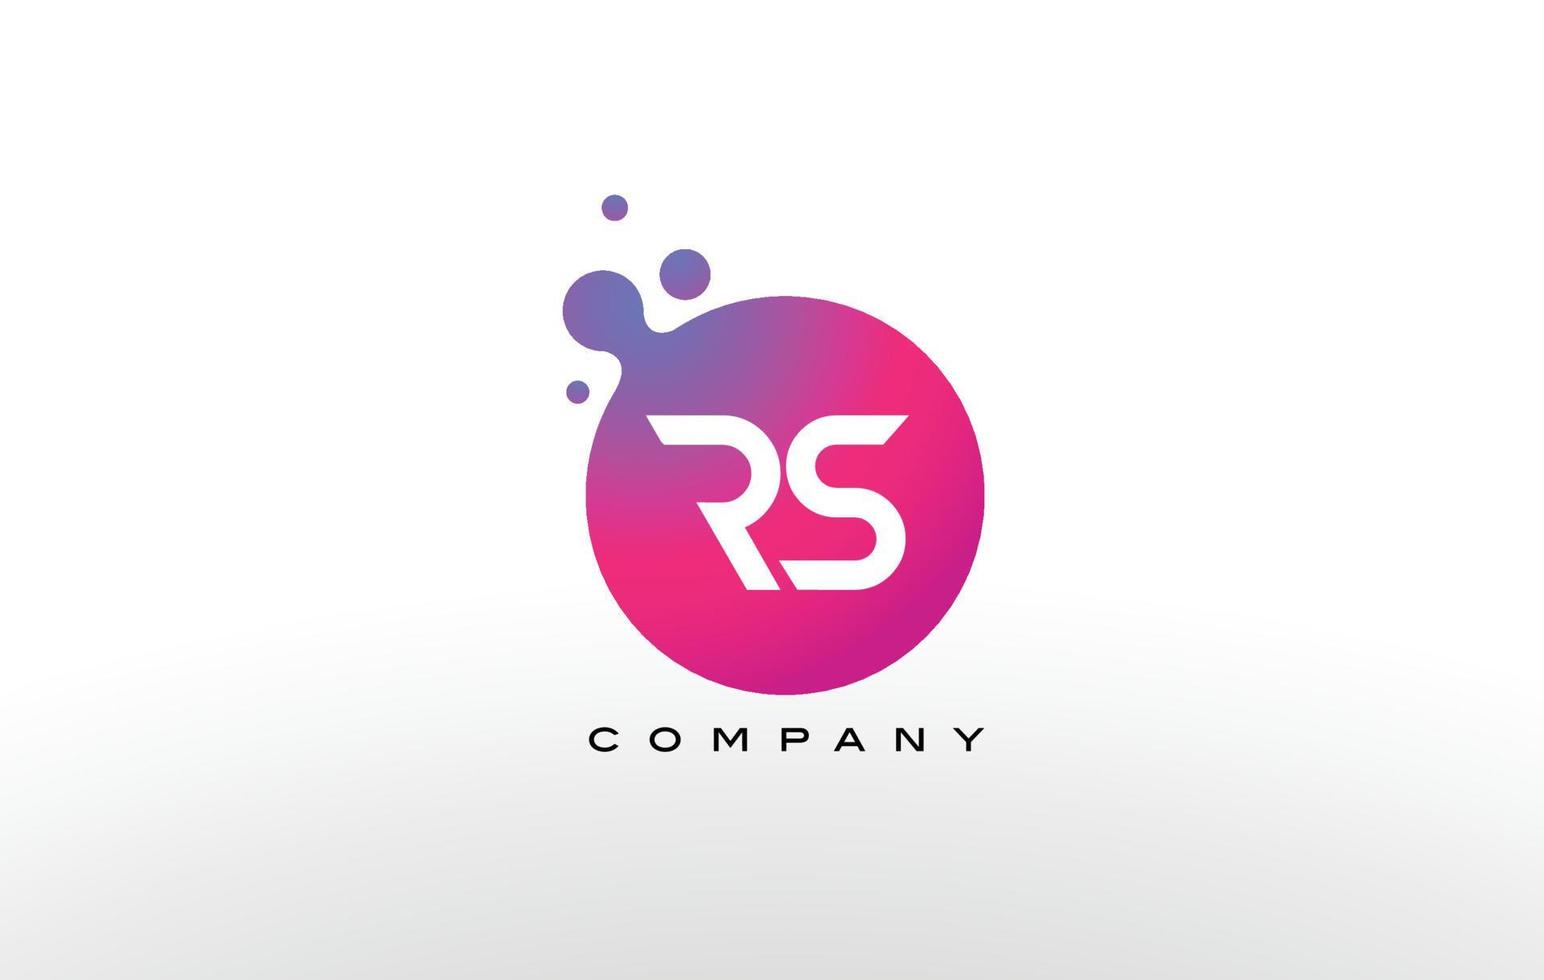 RS Letter Dots Logo Design with Creative Trendy Bubbles. vector